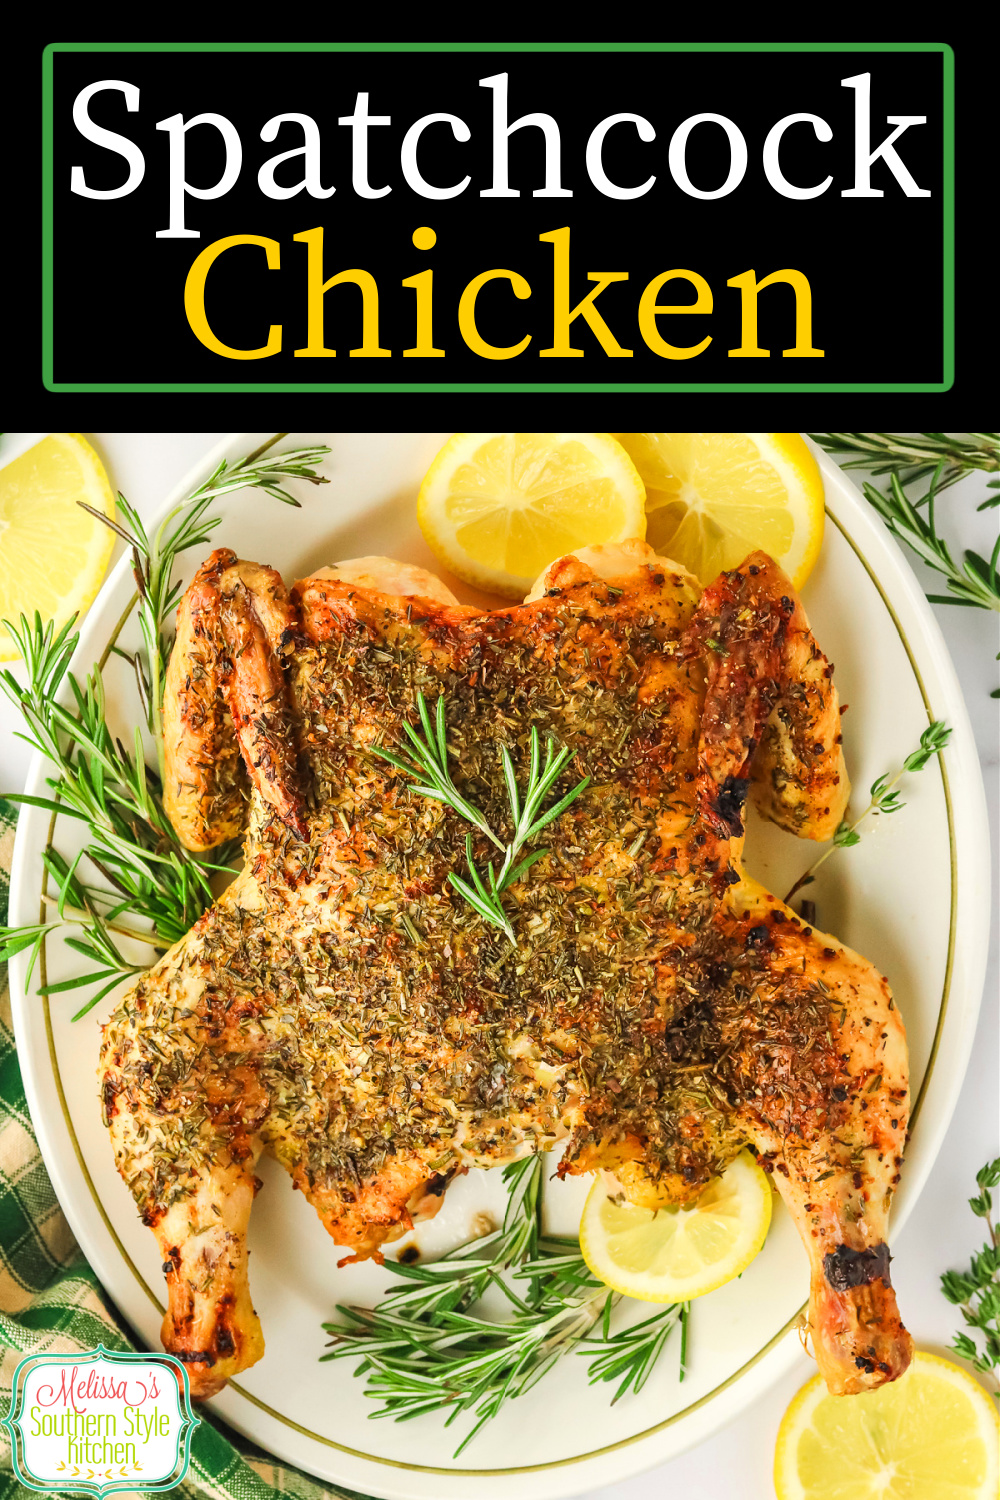 This juicy Spatchcock Chicken recipe features a simple technique that anyone can master. #roastchicken #easychickenrecipes #bakedchicken #spatchcockchicken via @melissasssk